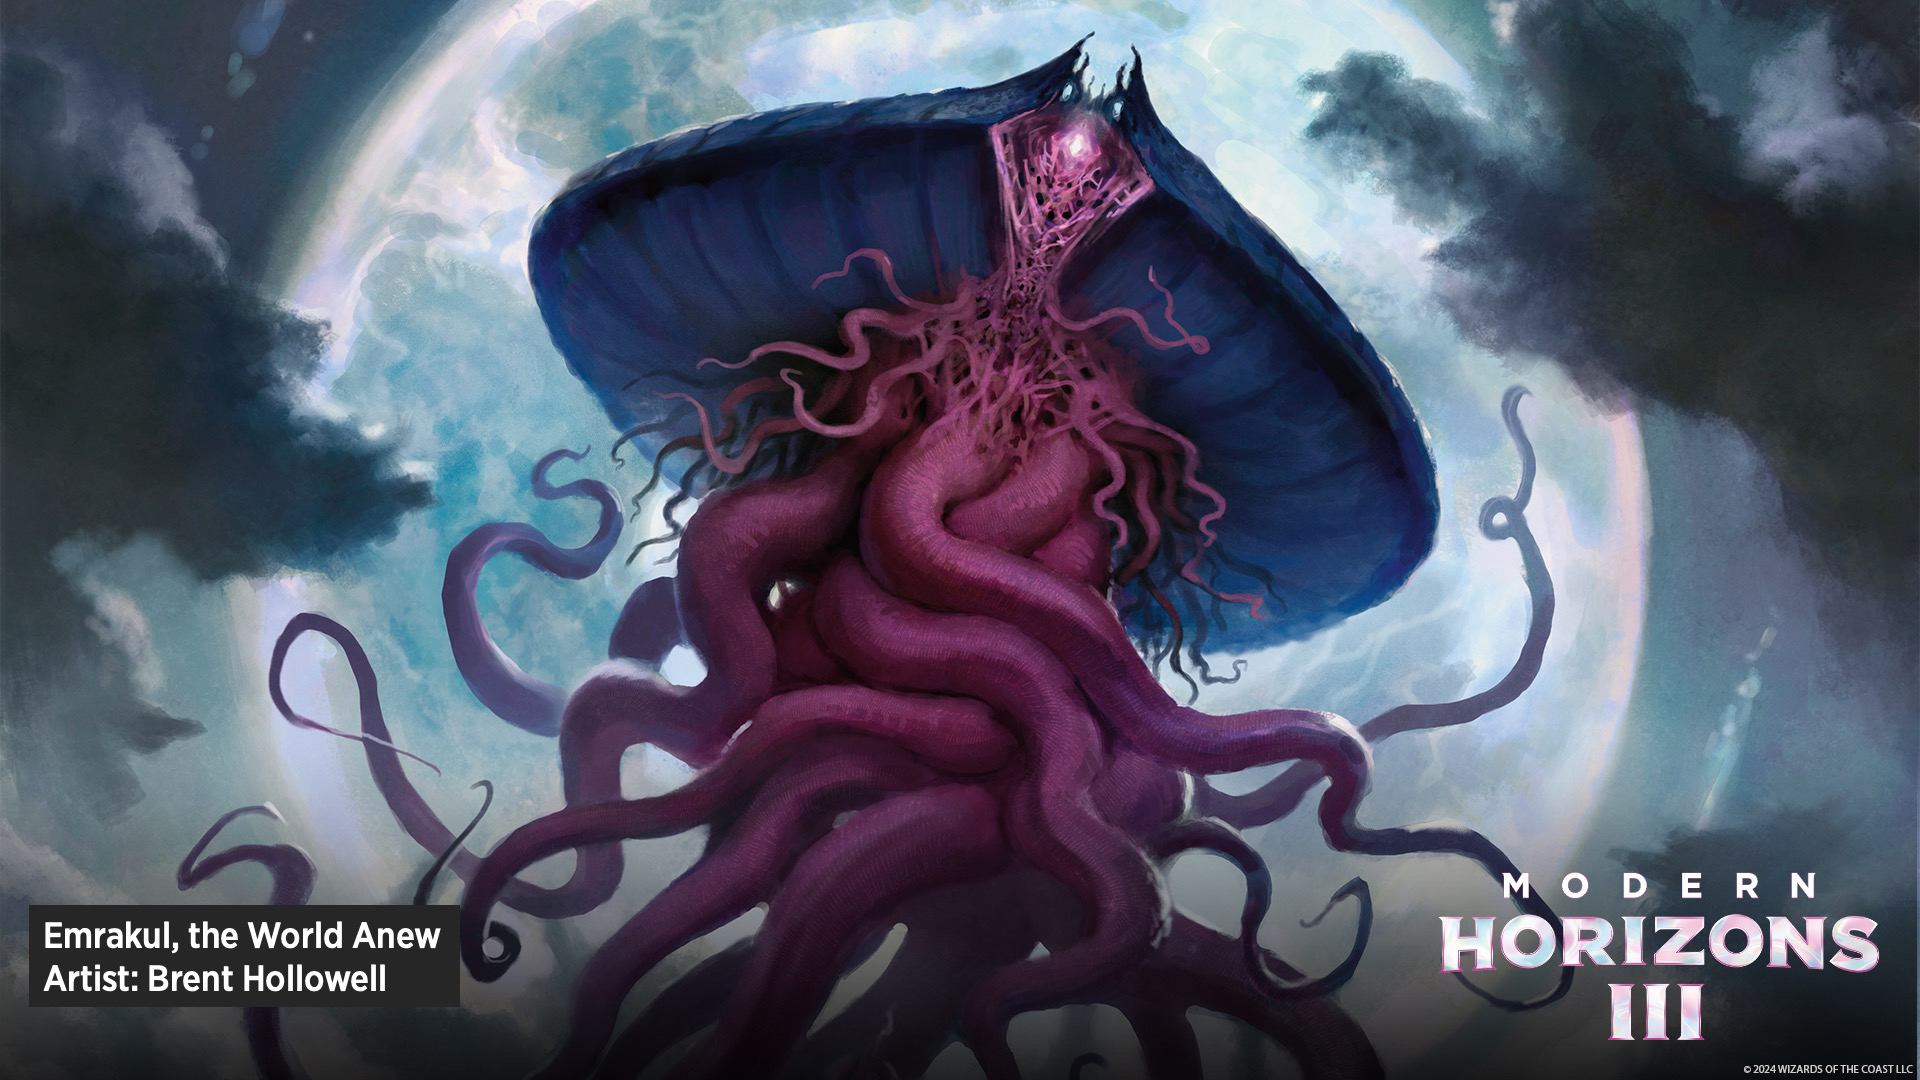 Here’s Where To Find All MTG Modern Horizons 3 Previews